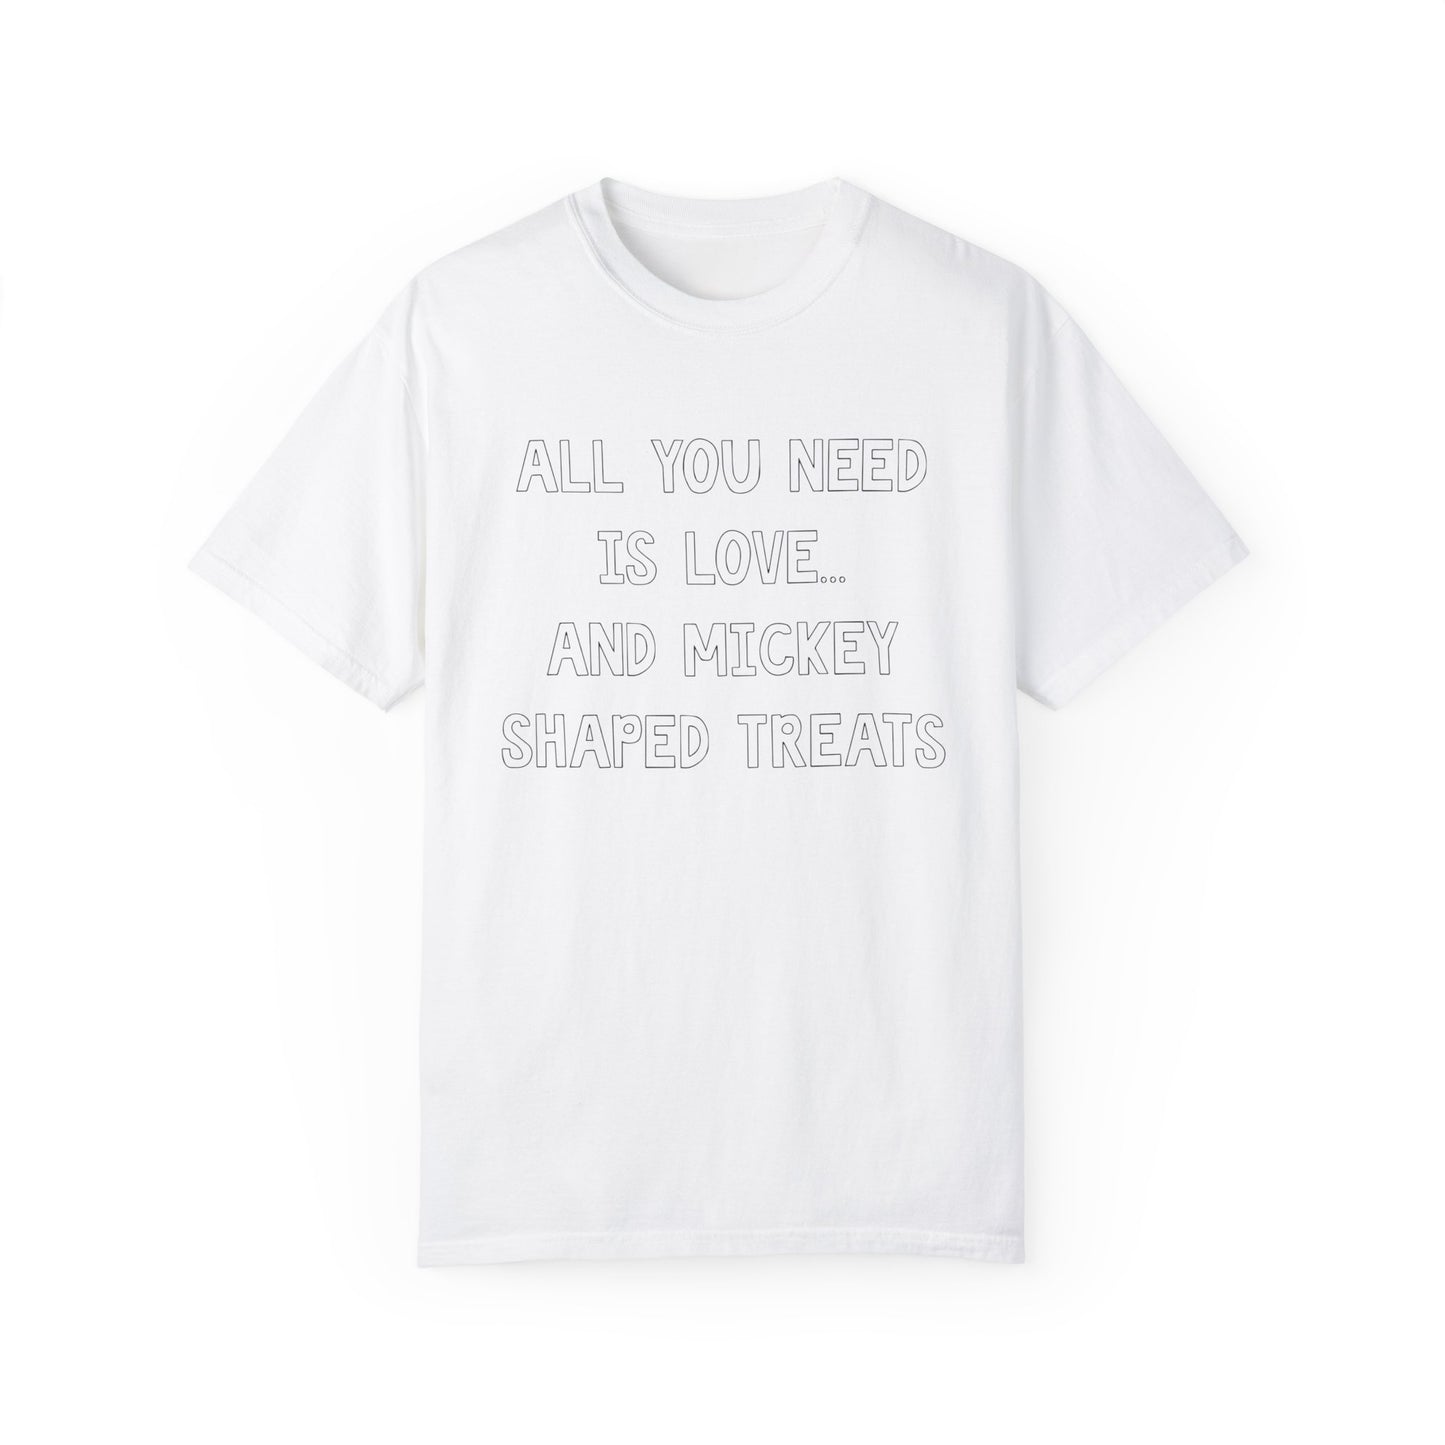 Adult All you need is love Tee